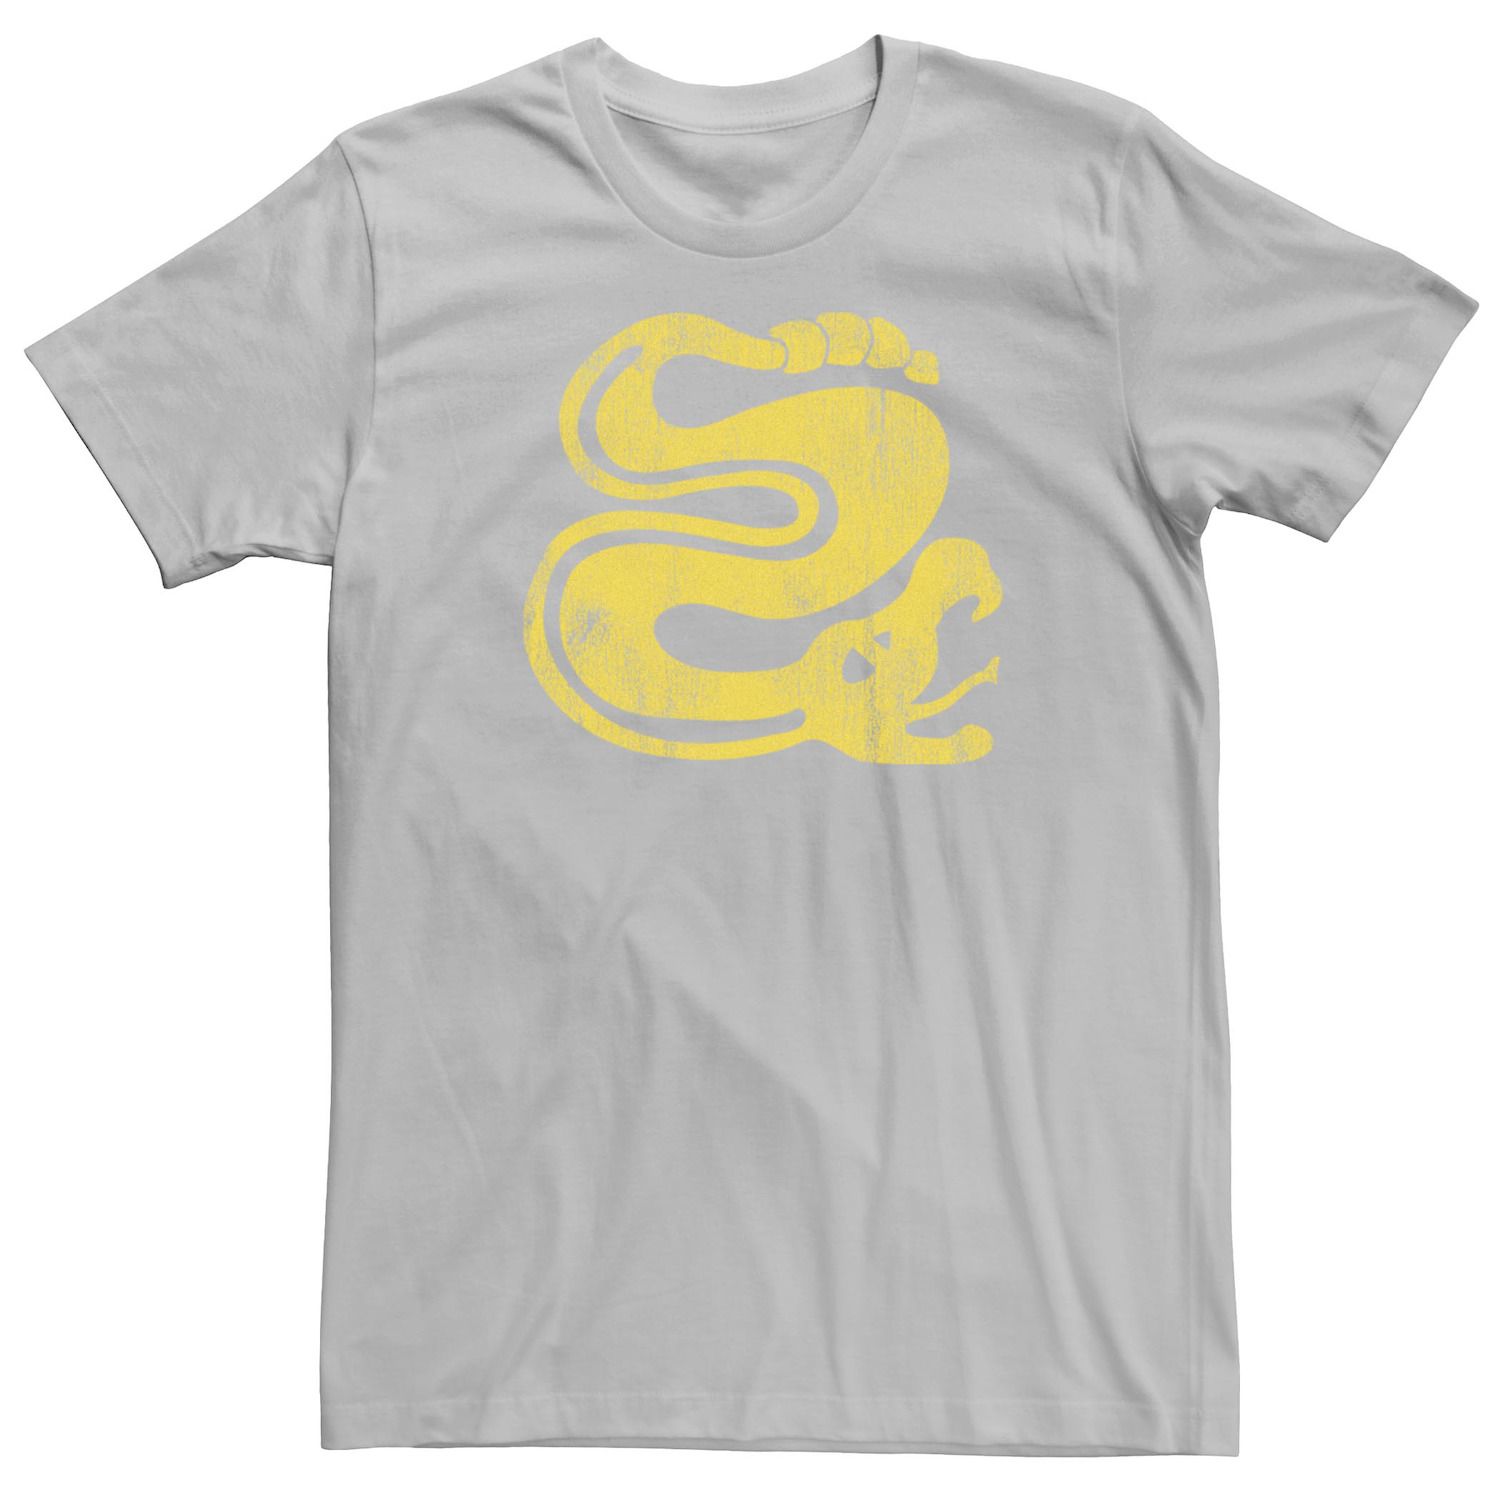 Image for Licensed Character Men's Hidden Temple Yellow Snake Distressed Stamp Tee at Kohl's.